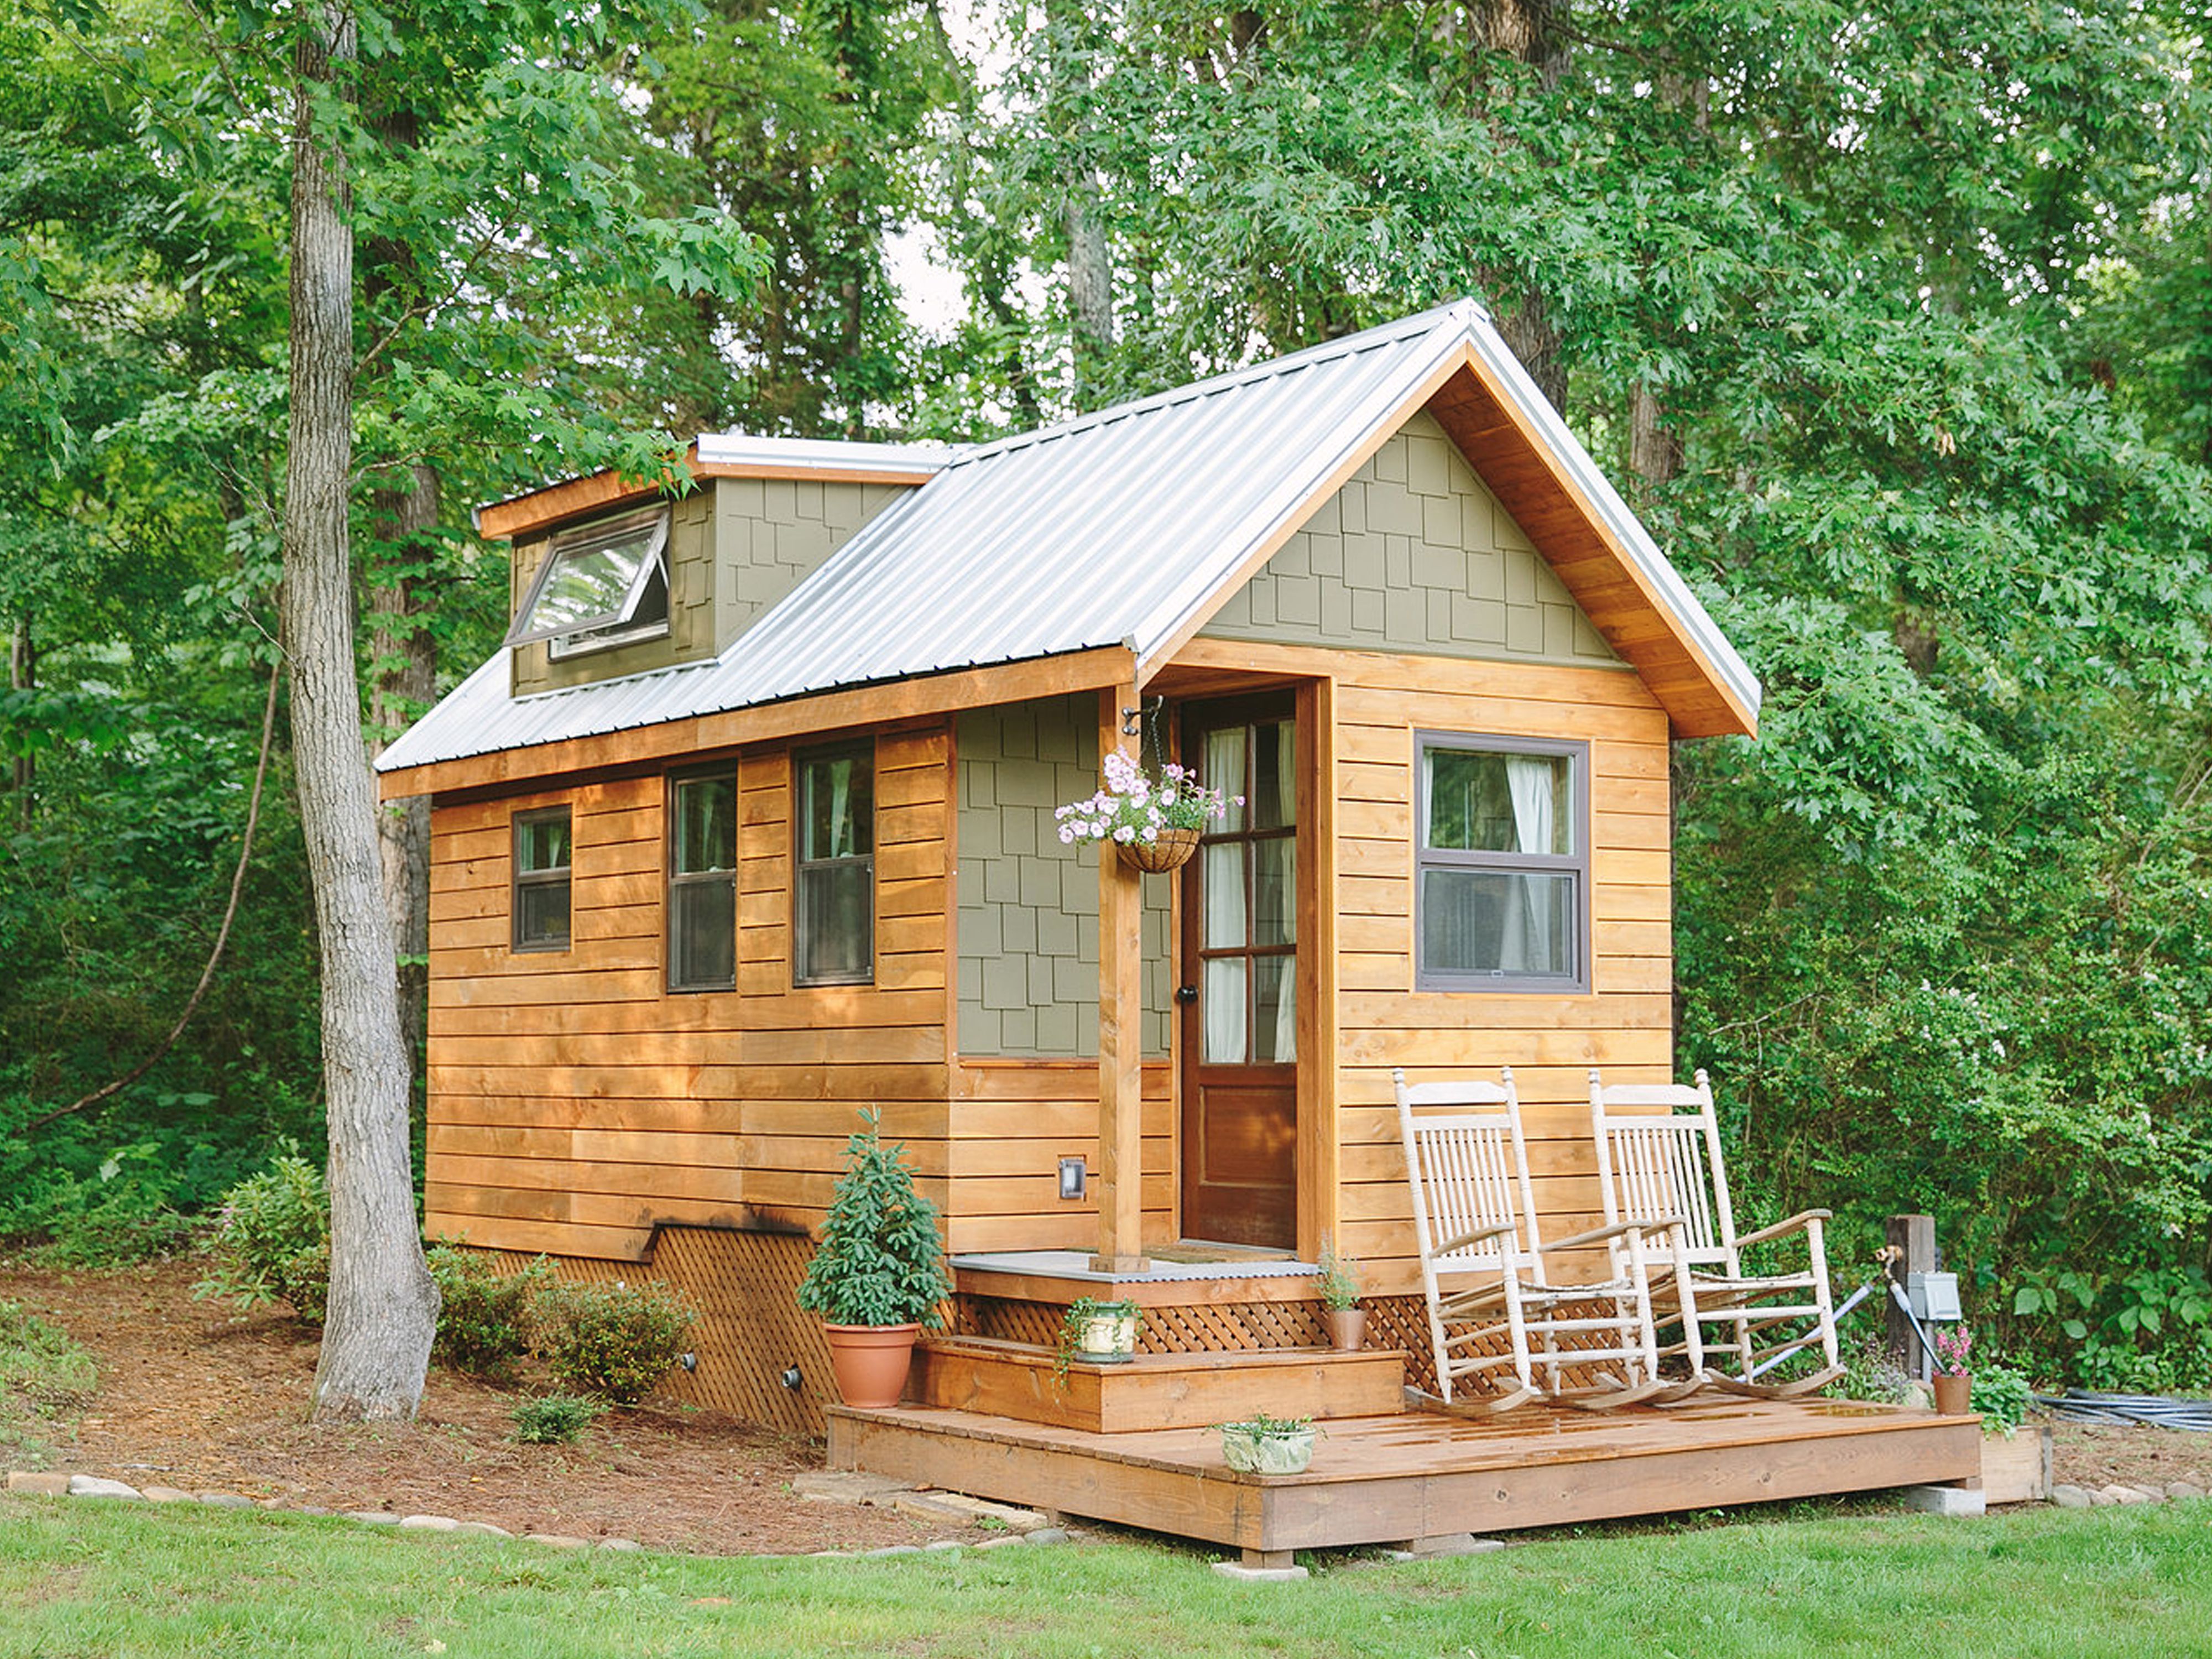 68 Best Tiny Houses - Design Ideas for Small Homes